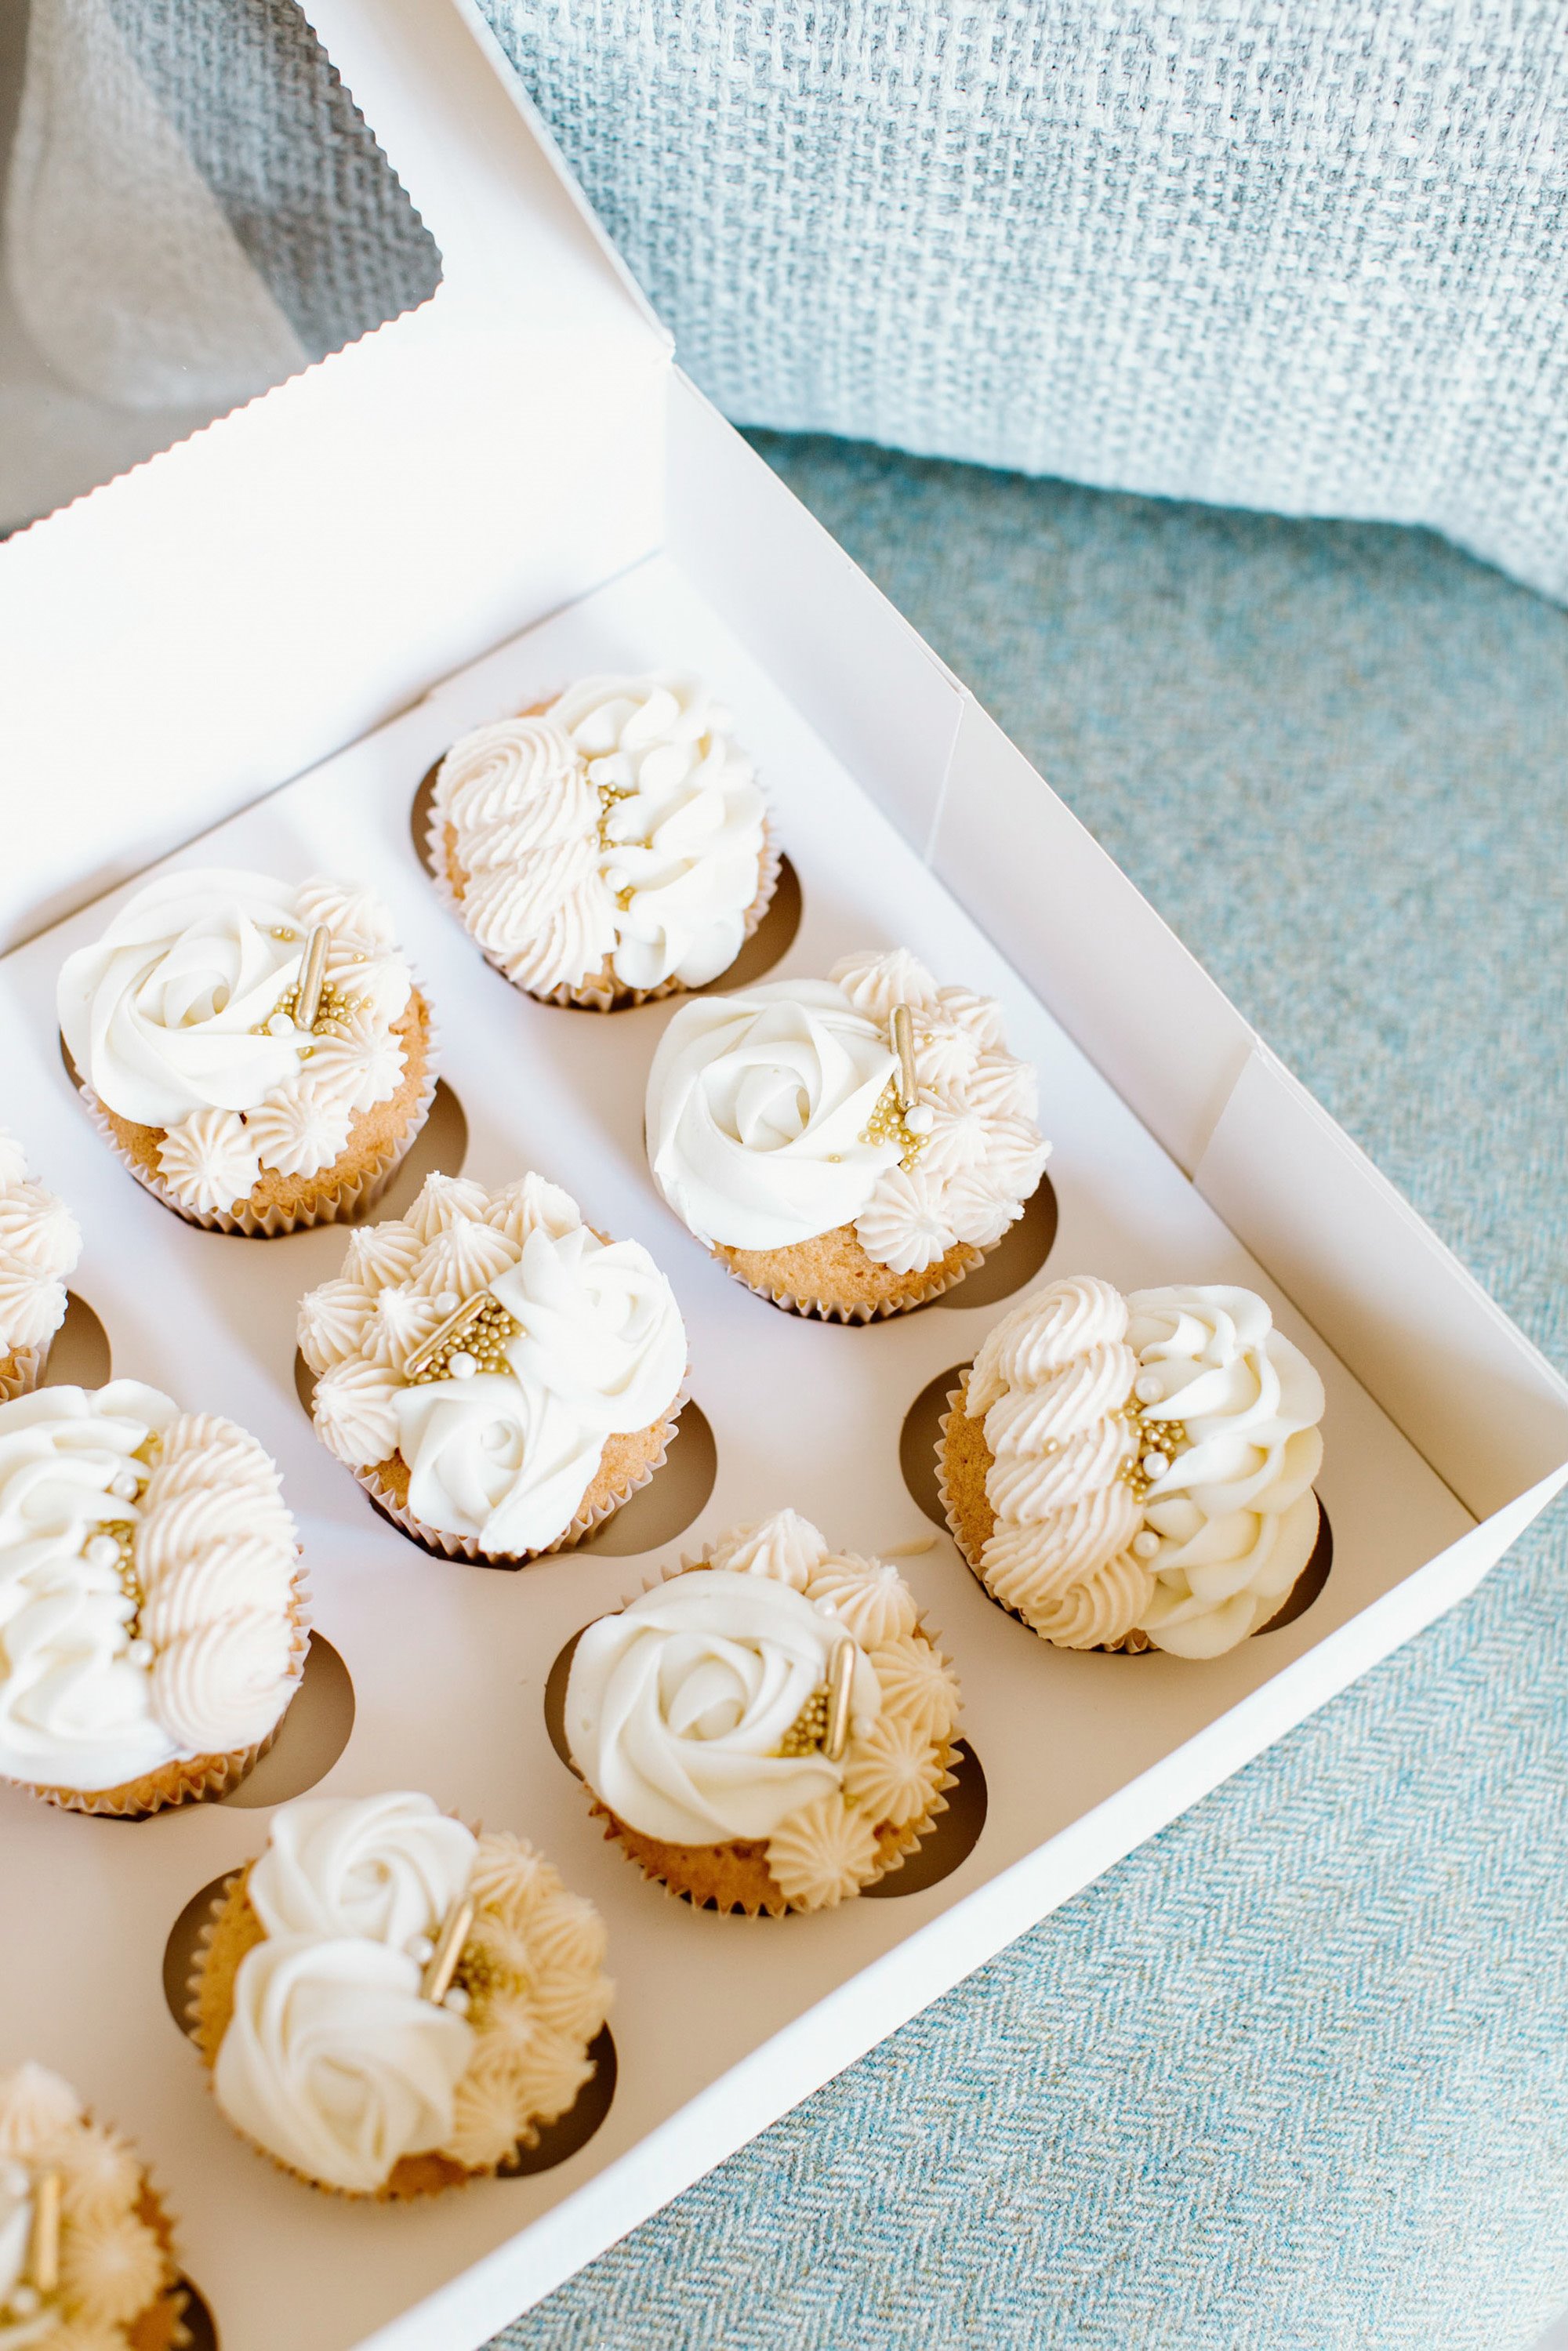 Pearl cupcakes in a white box for wedding morning gift